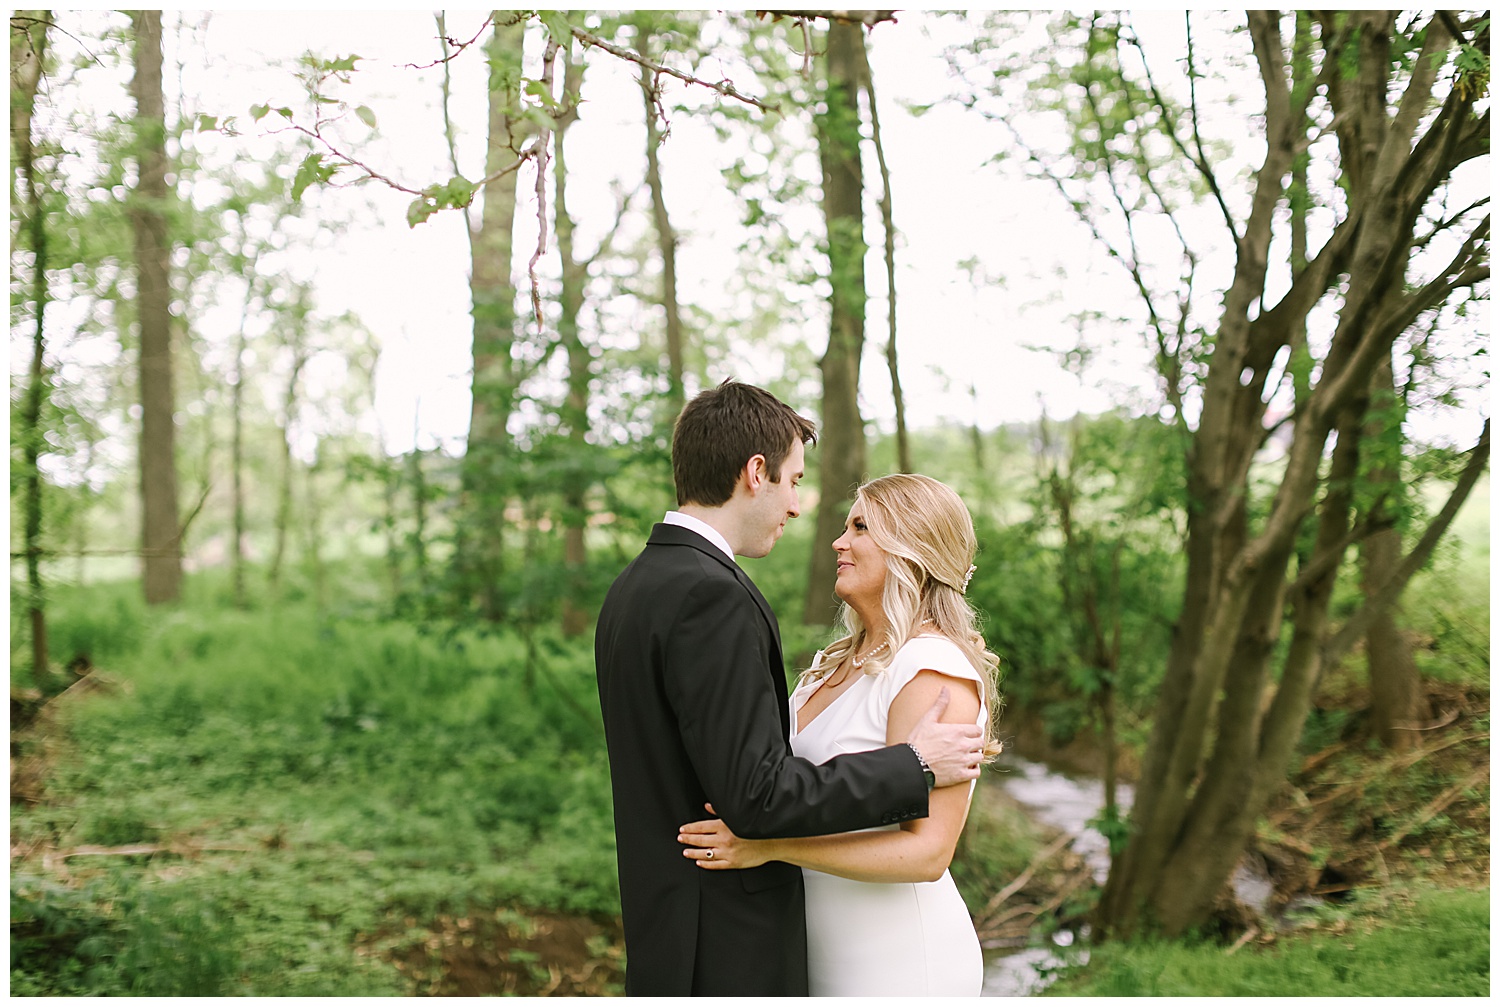 Intimate Home Wedding in Shelbyville, Kentucky — Kendra Farris Photography